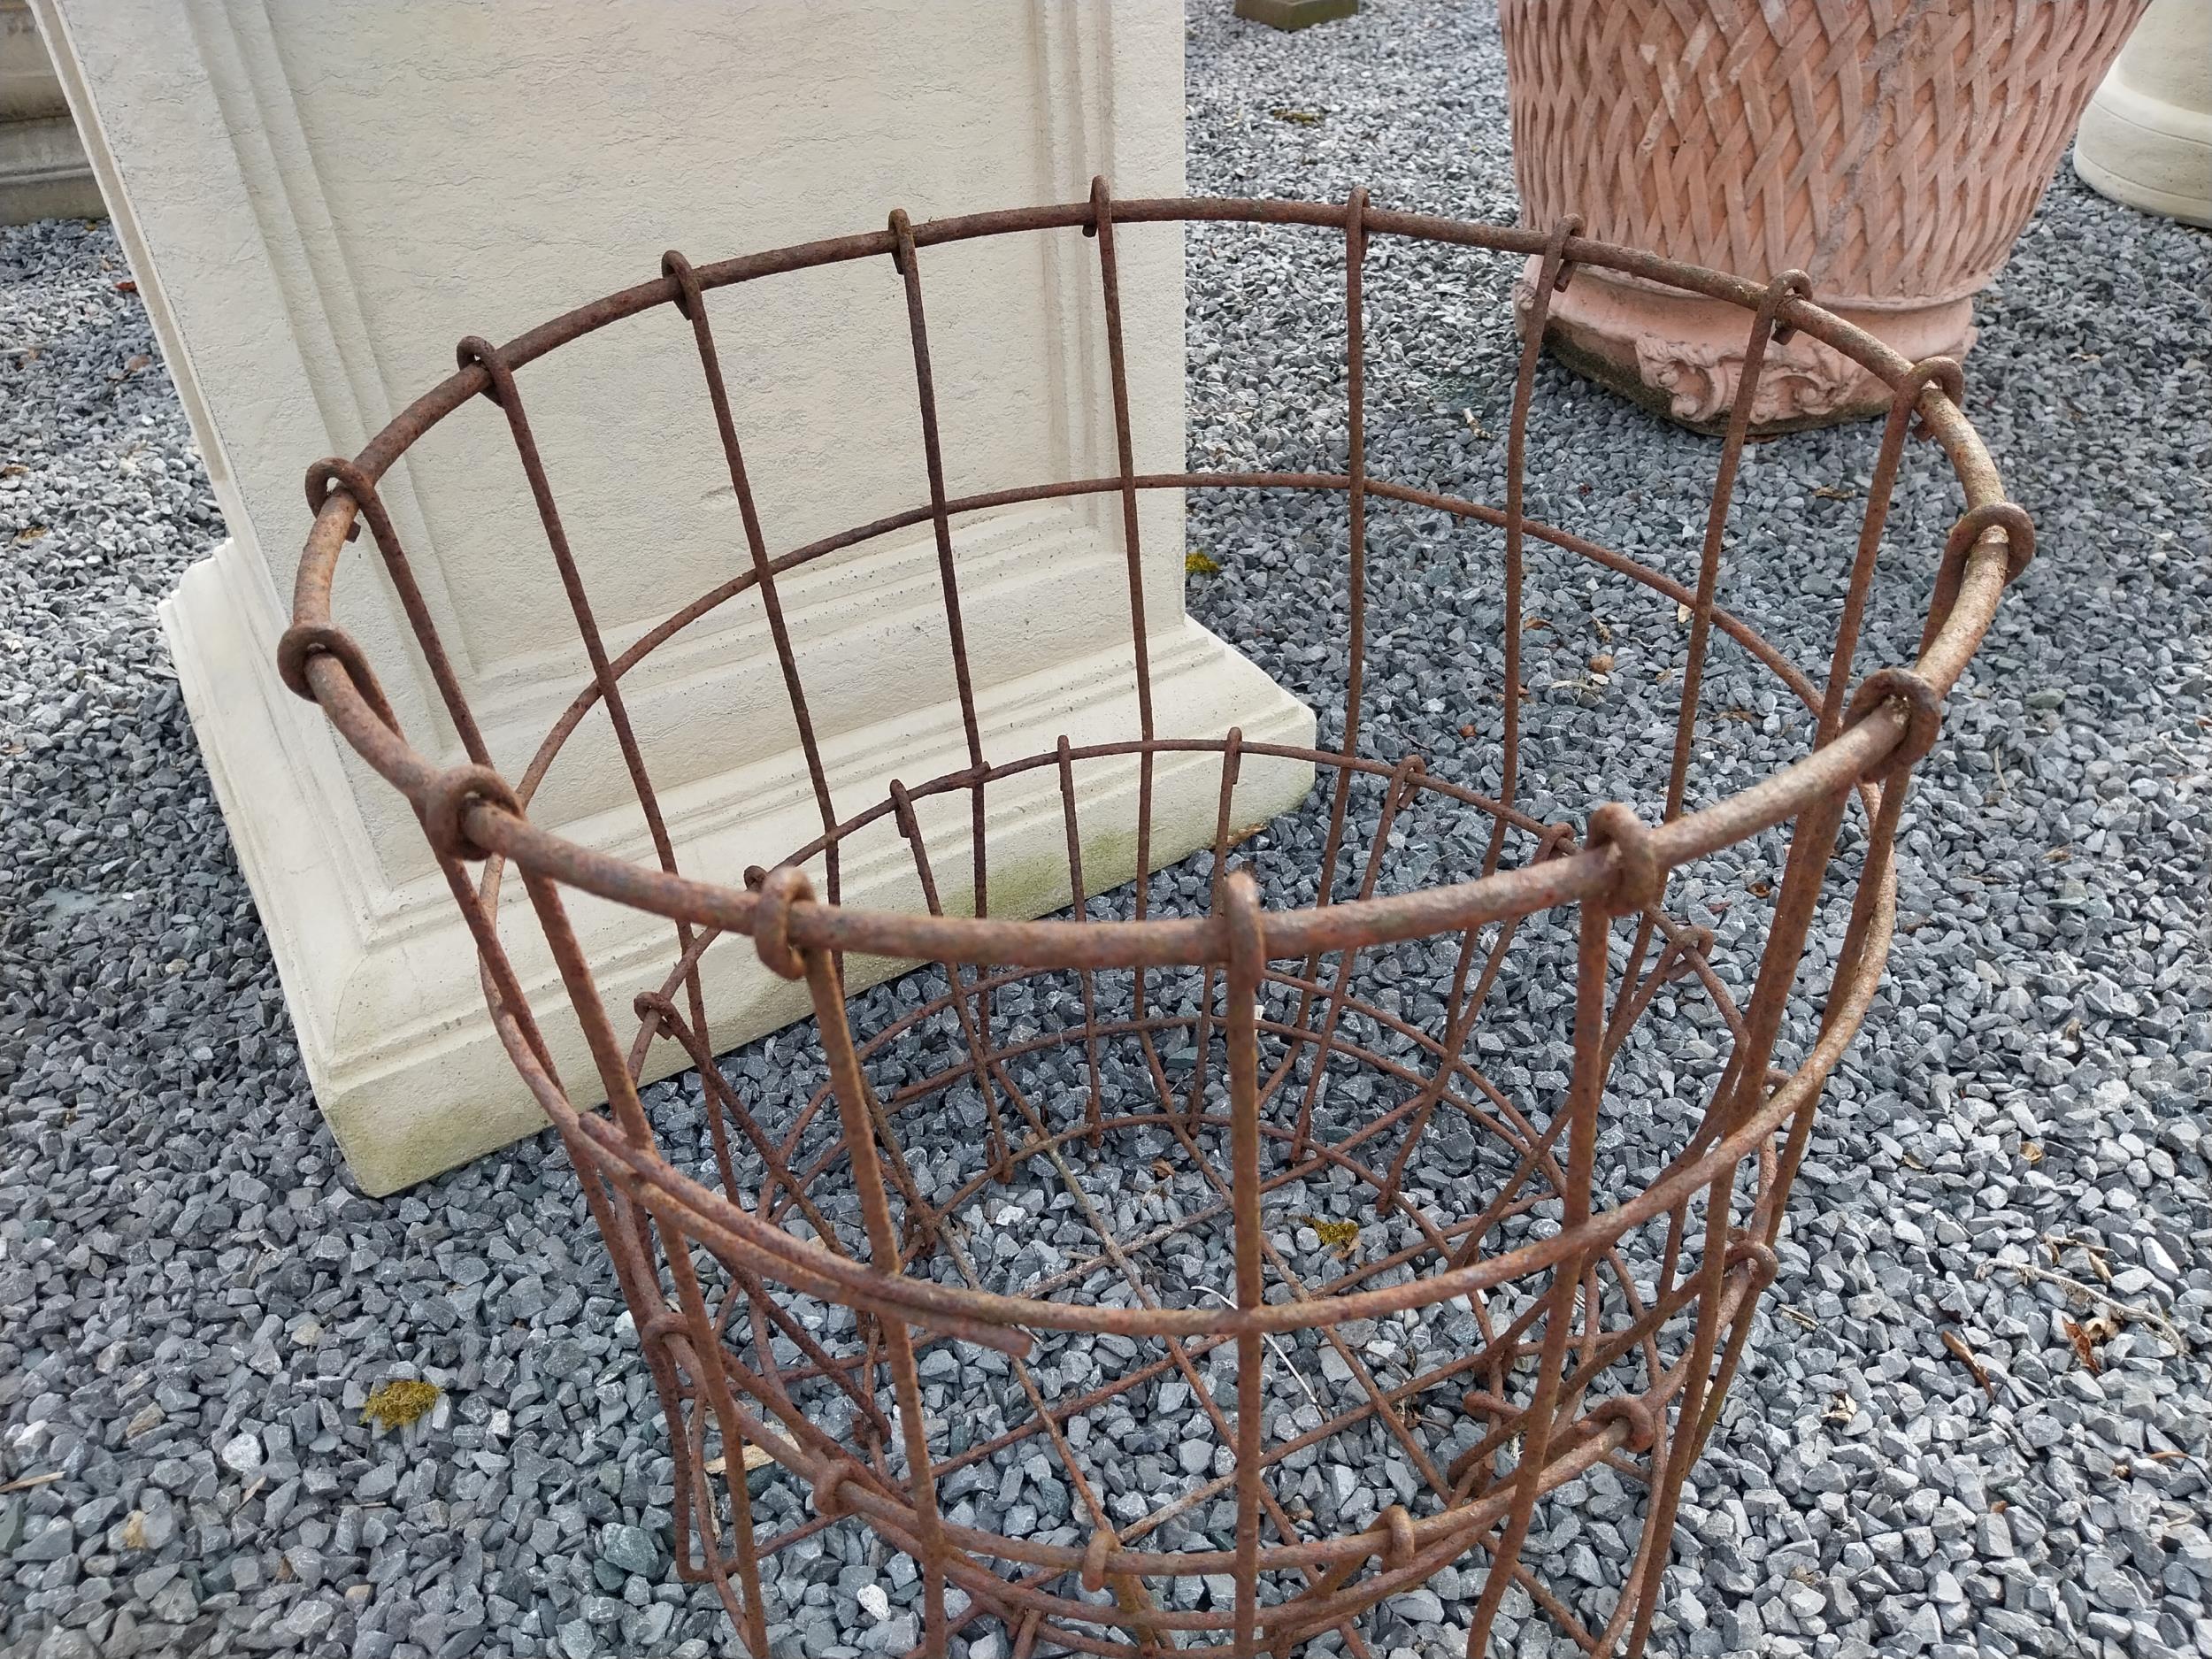 Early 20th C. wrought iron planter {52 cm H x 55 cm Dia.}. - Image 2 of 2